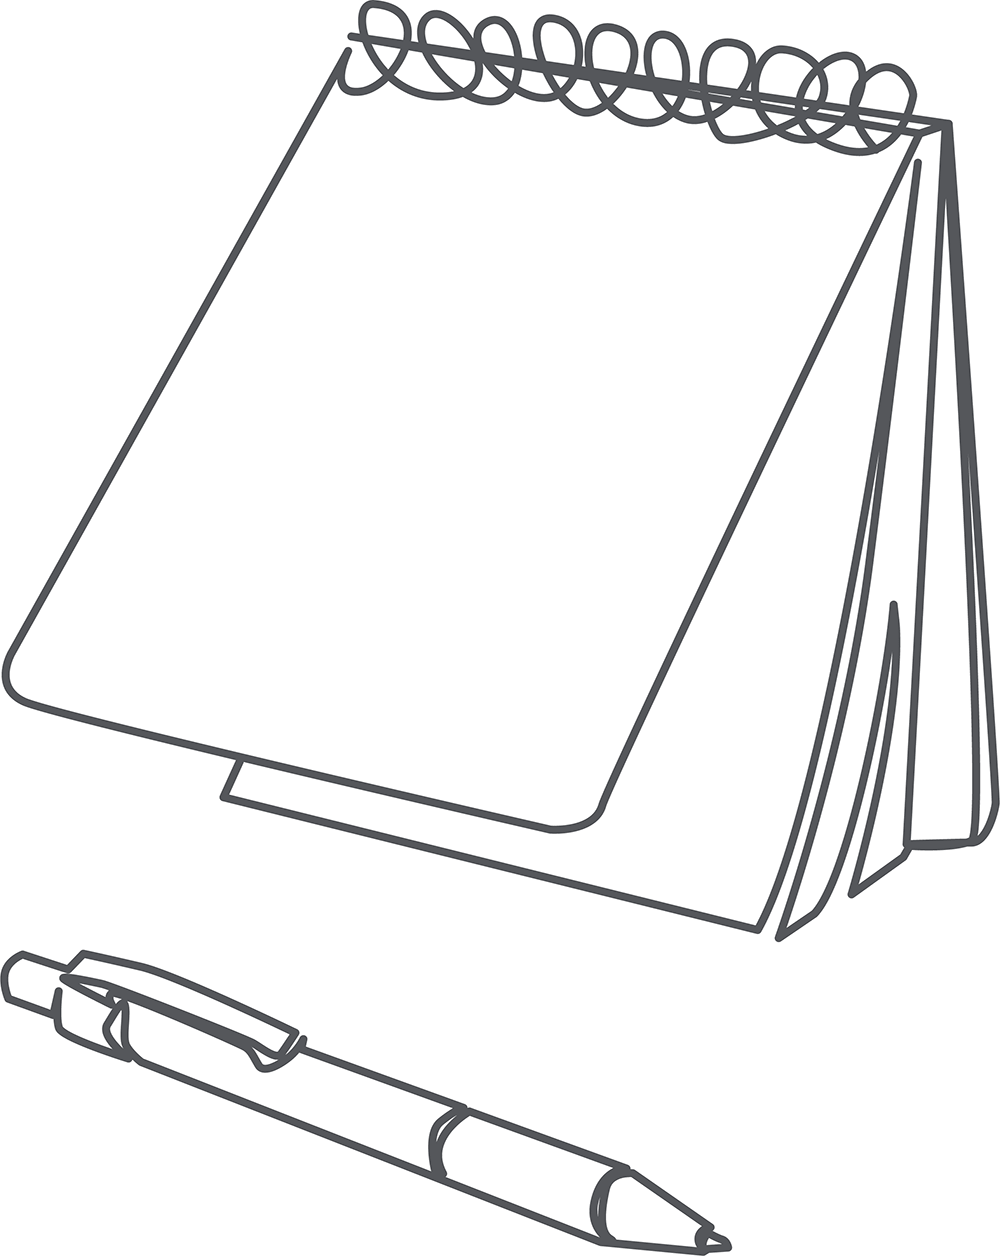 Illustration of a notebook and pen